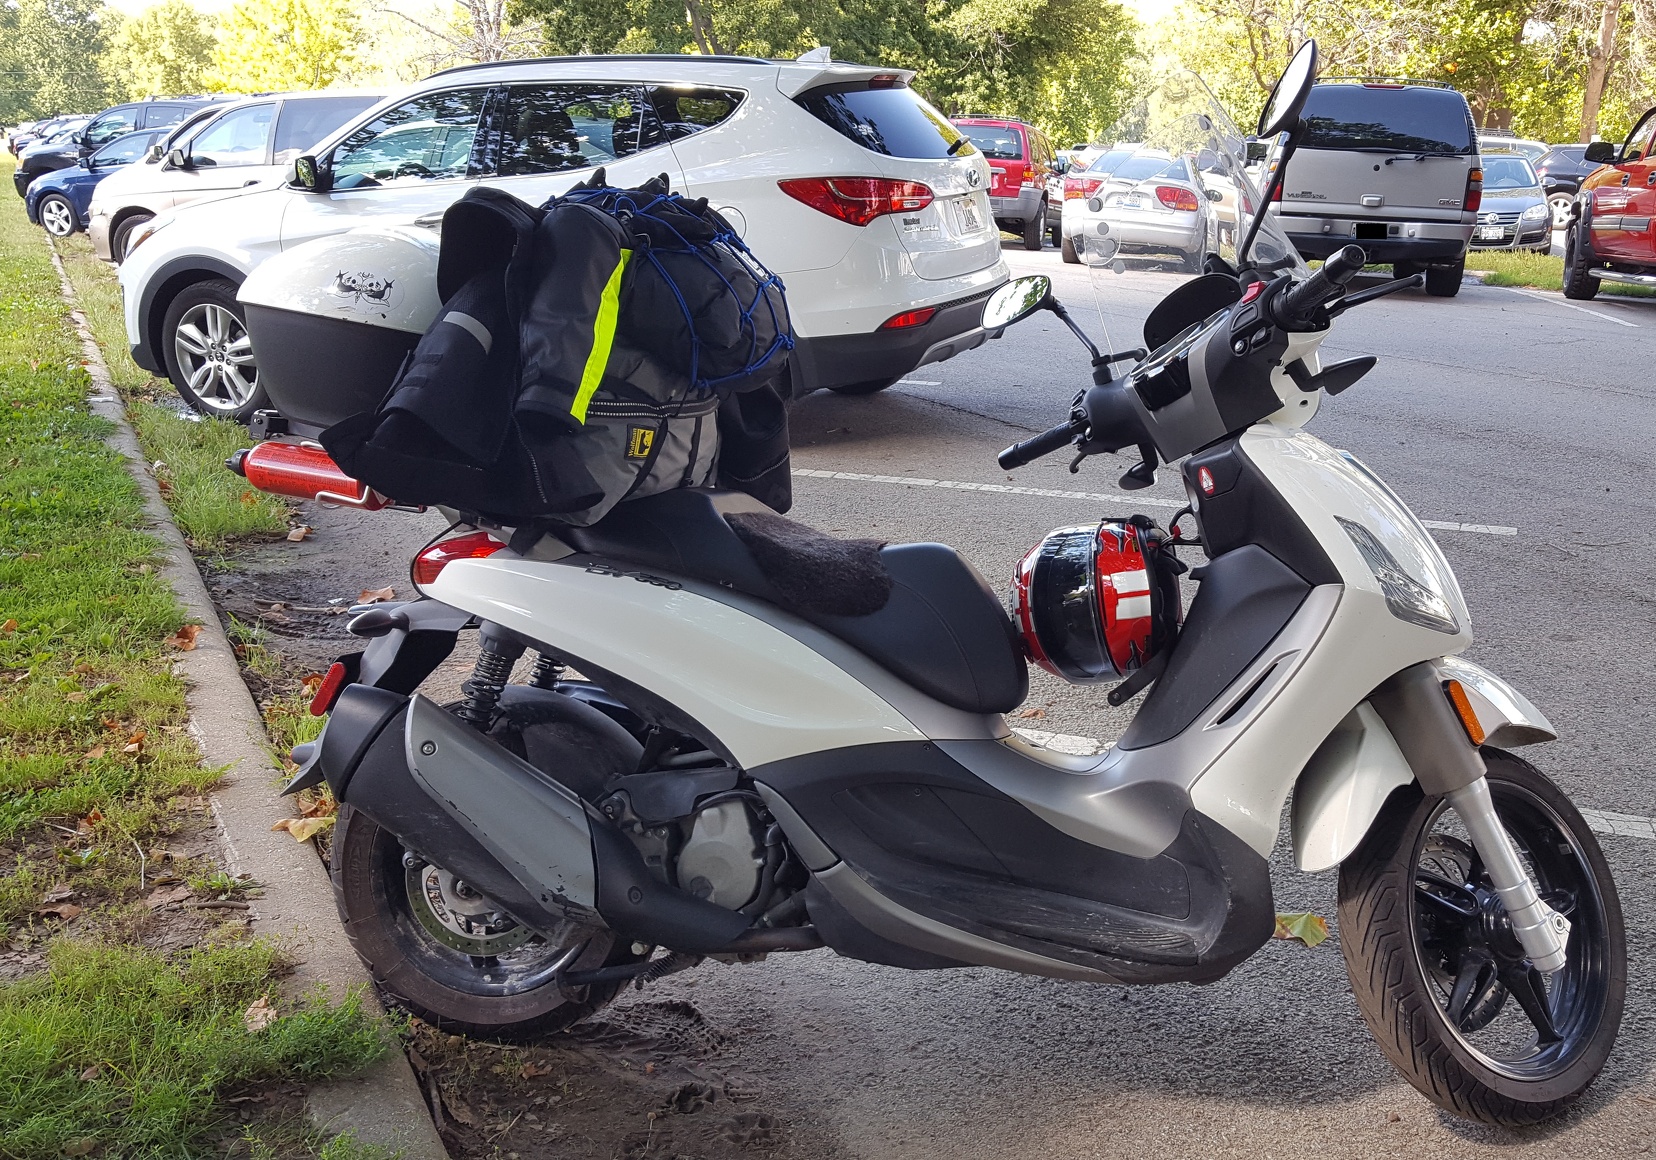 That's a lot of stuff for one tiny scooter!